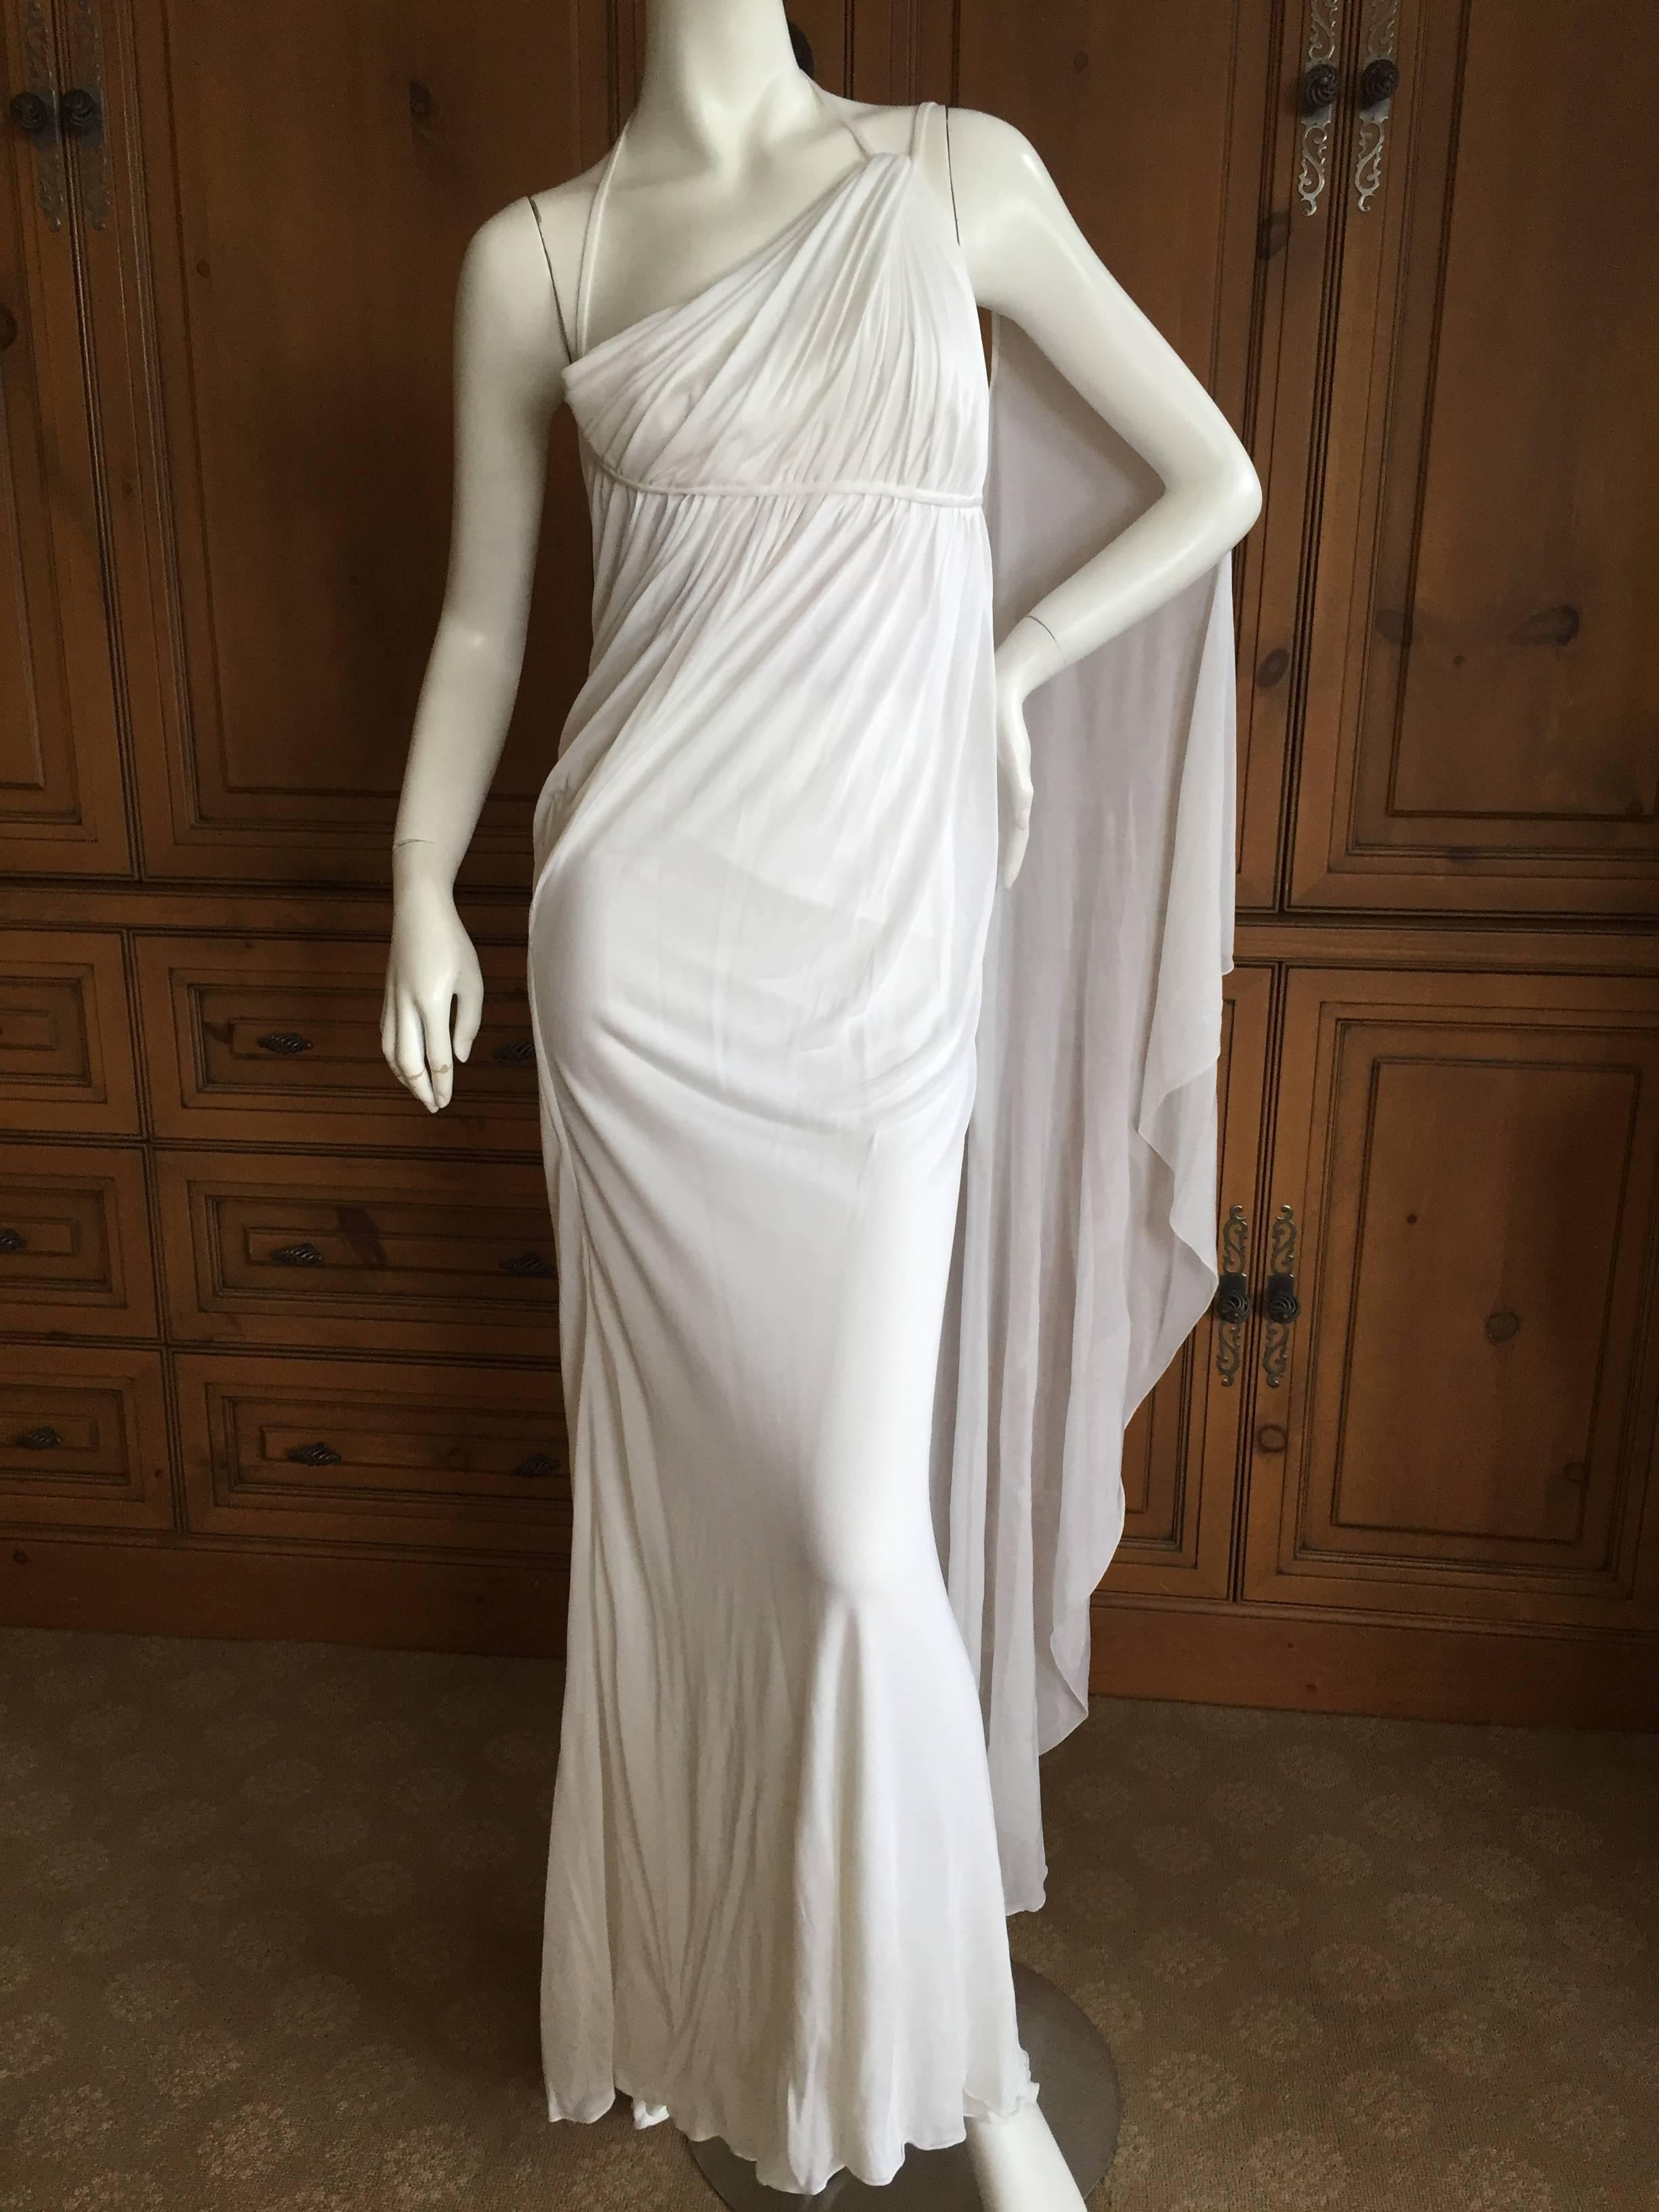 Gorgeous vintage white goddess gown from Versace.

The original store tags still attached.

There are multiple layers of fabric, some sheer.

Please use zoom feature to see details.

Size 42 (runs small)

Bust 36